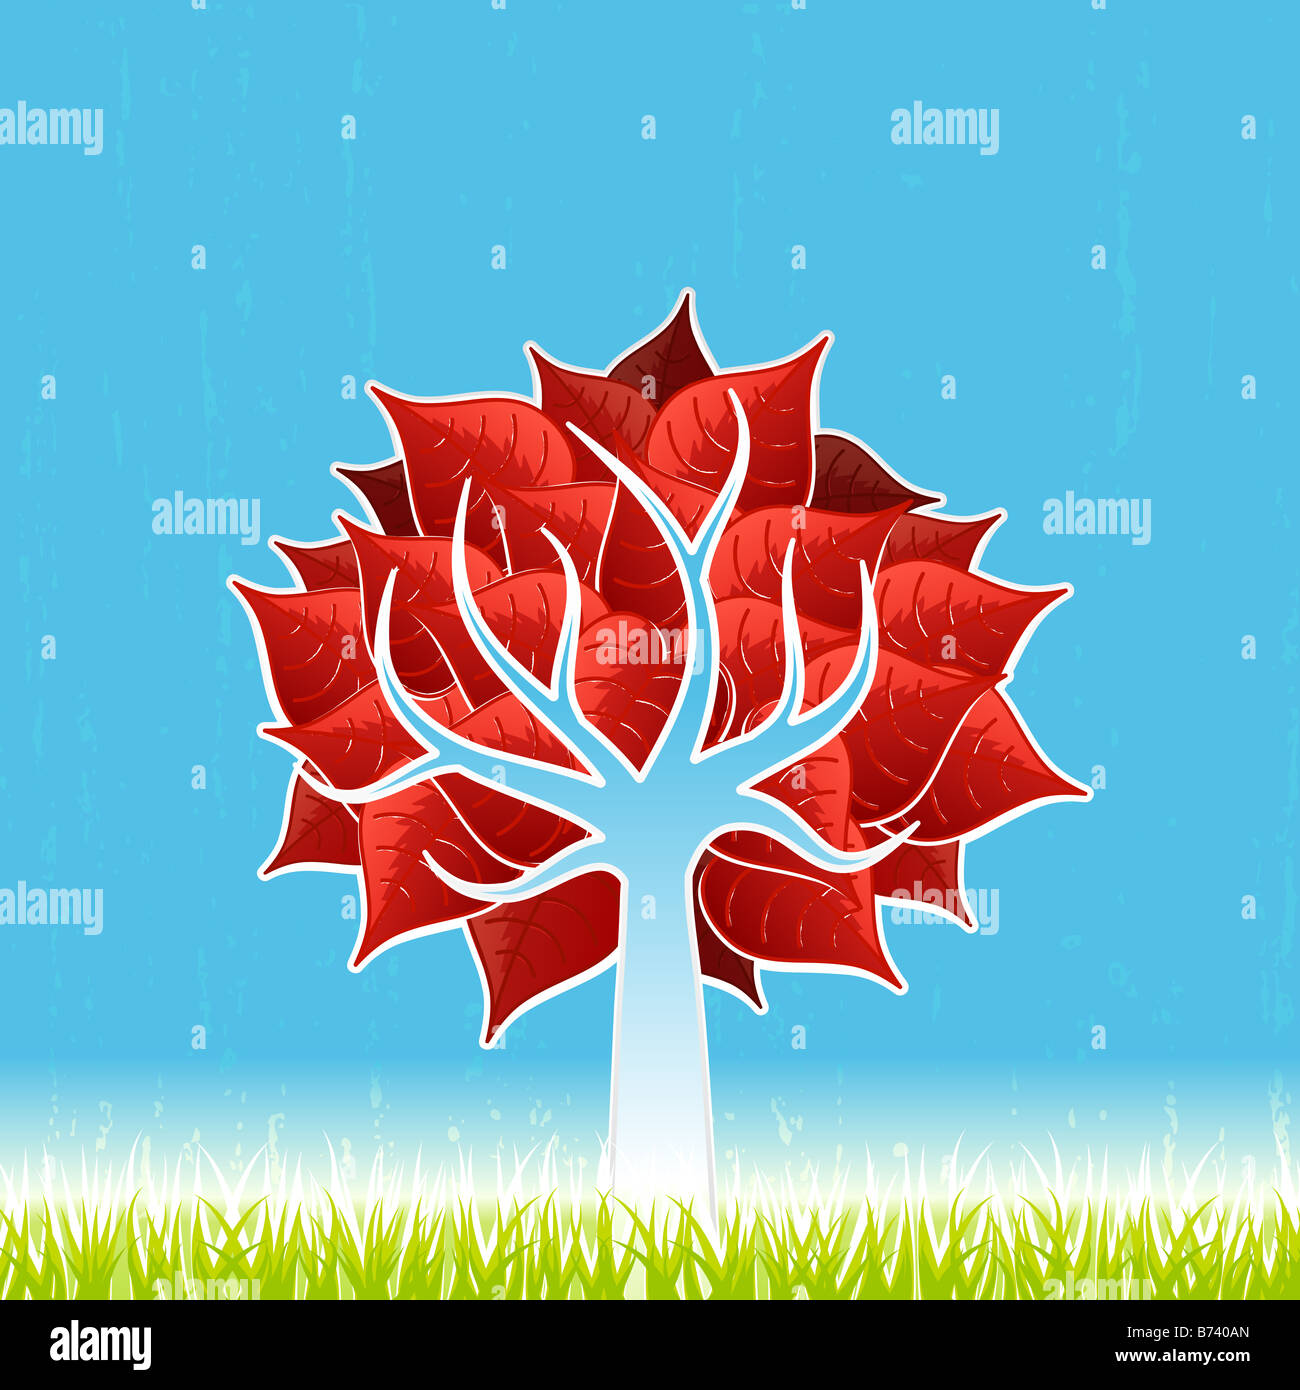 Vector illustration of a stylized red leaf tree with green grass and textured blue horizon sky Stock Photo